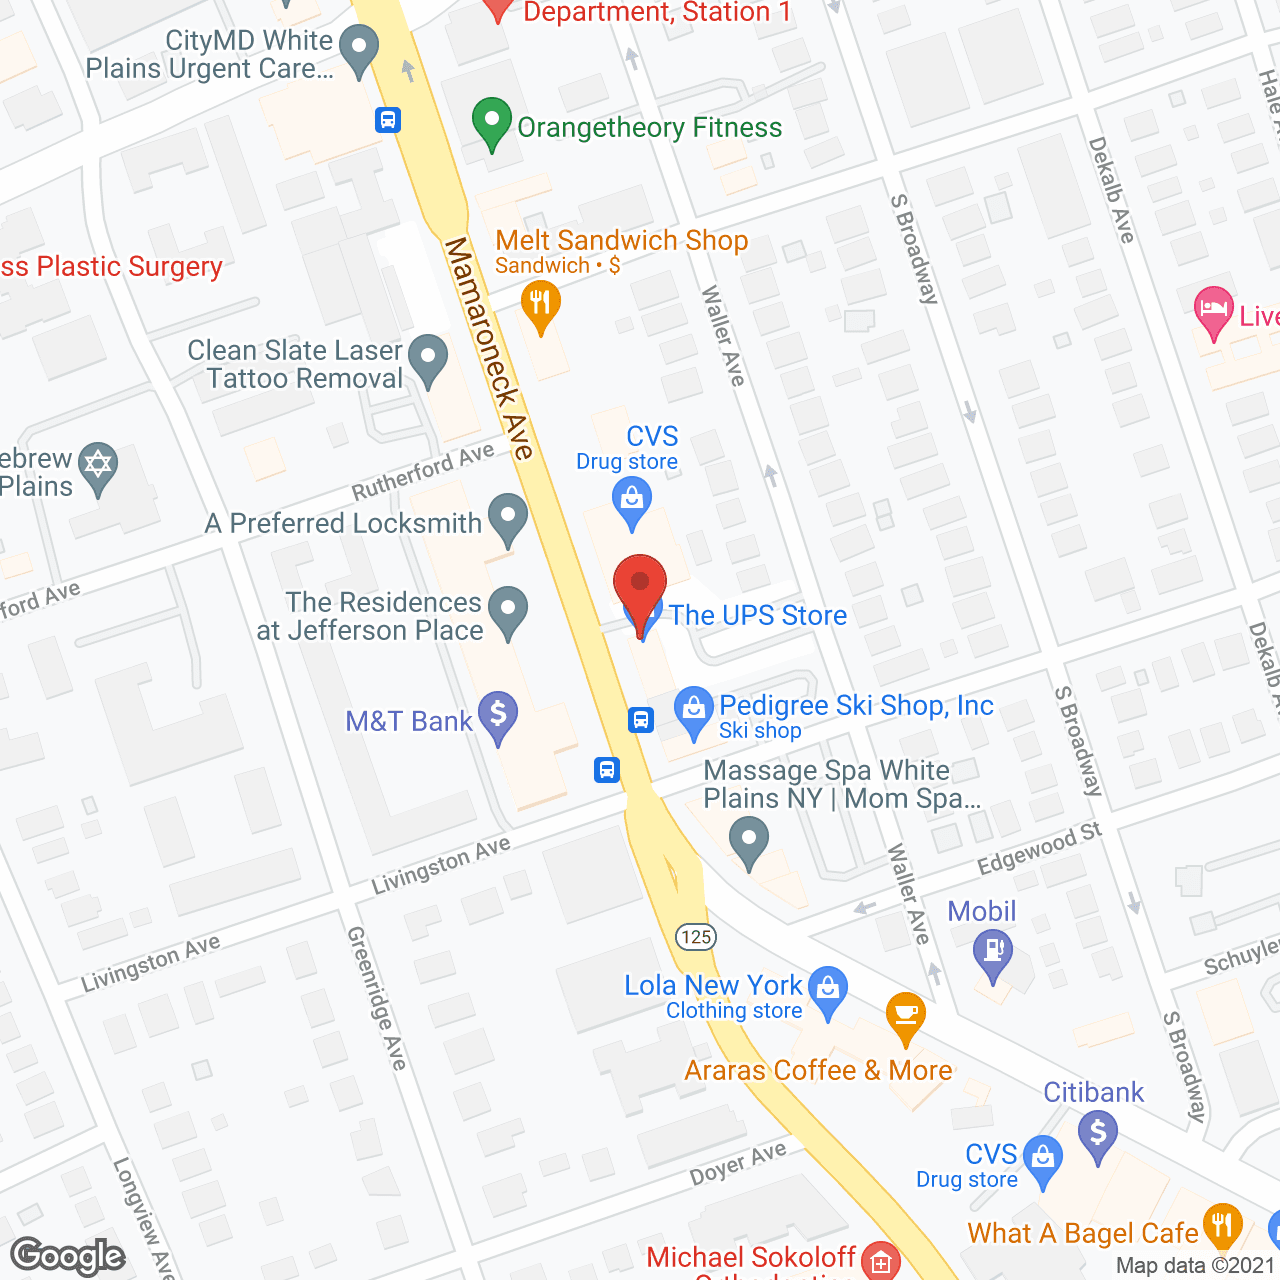 Essential Care - White Plains in google map